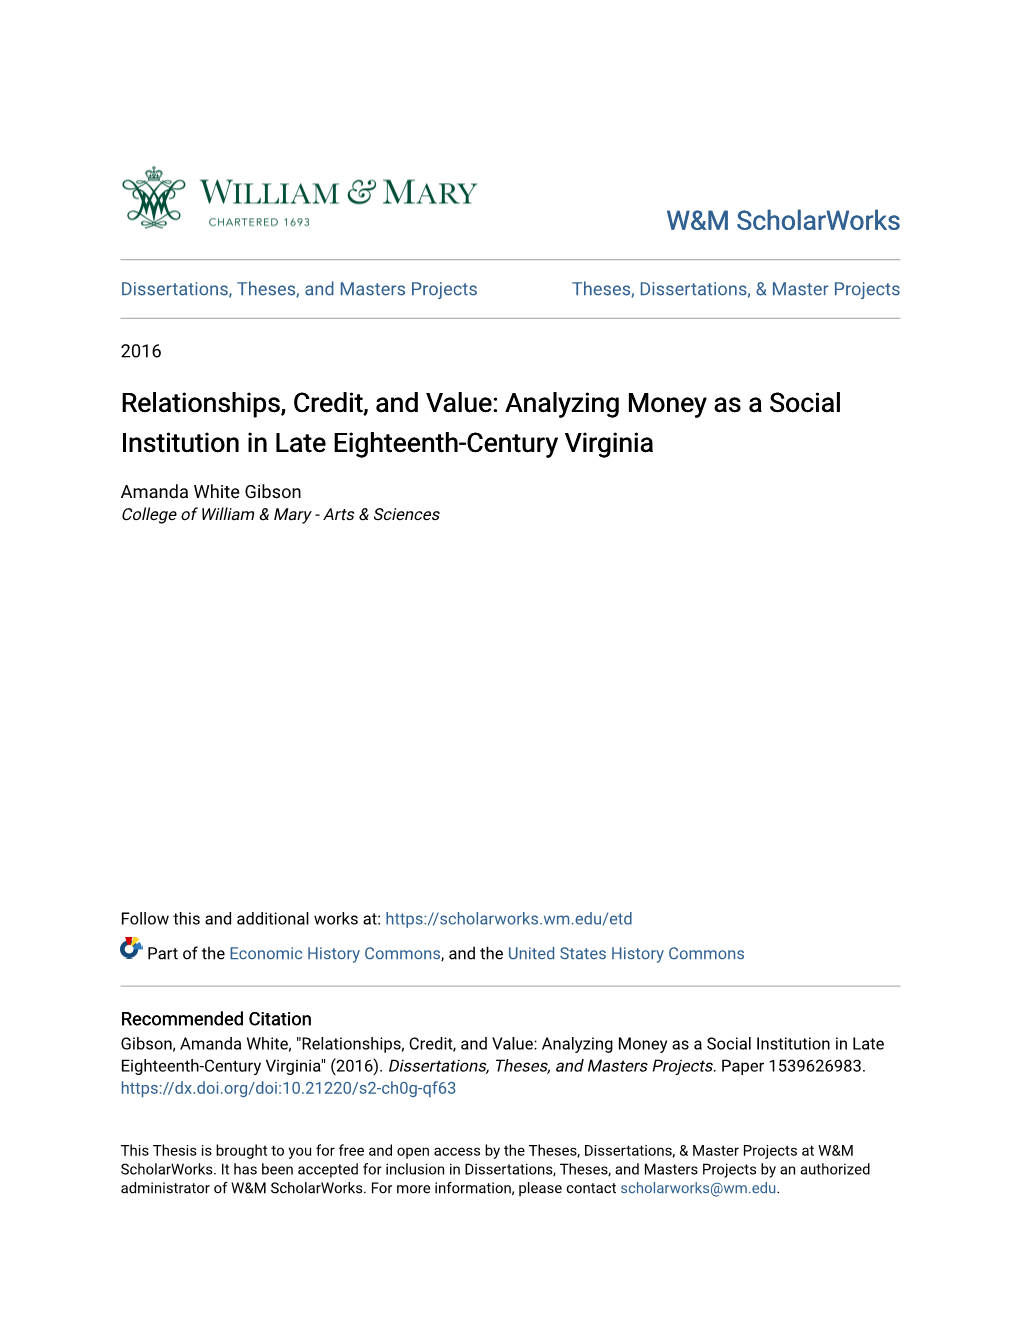 Relationships, Credit, and Value: Analyzing Money As a Social Institution in Late Eighteenth-Century Virginia